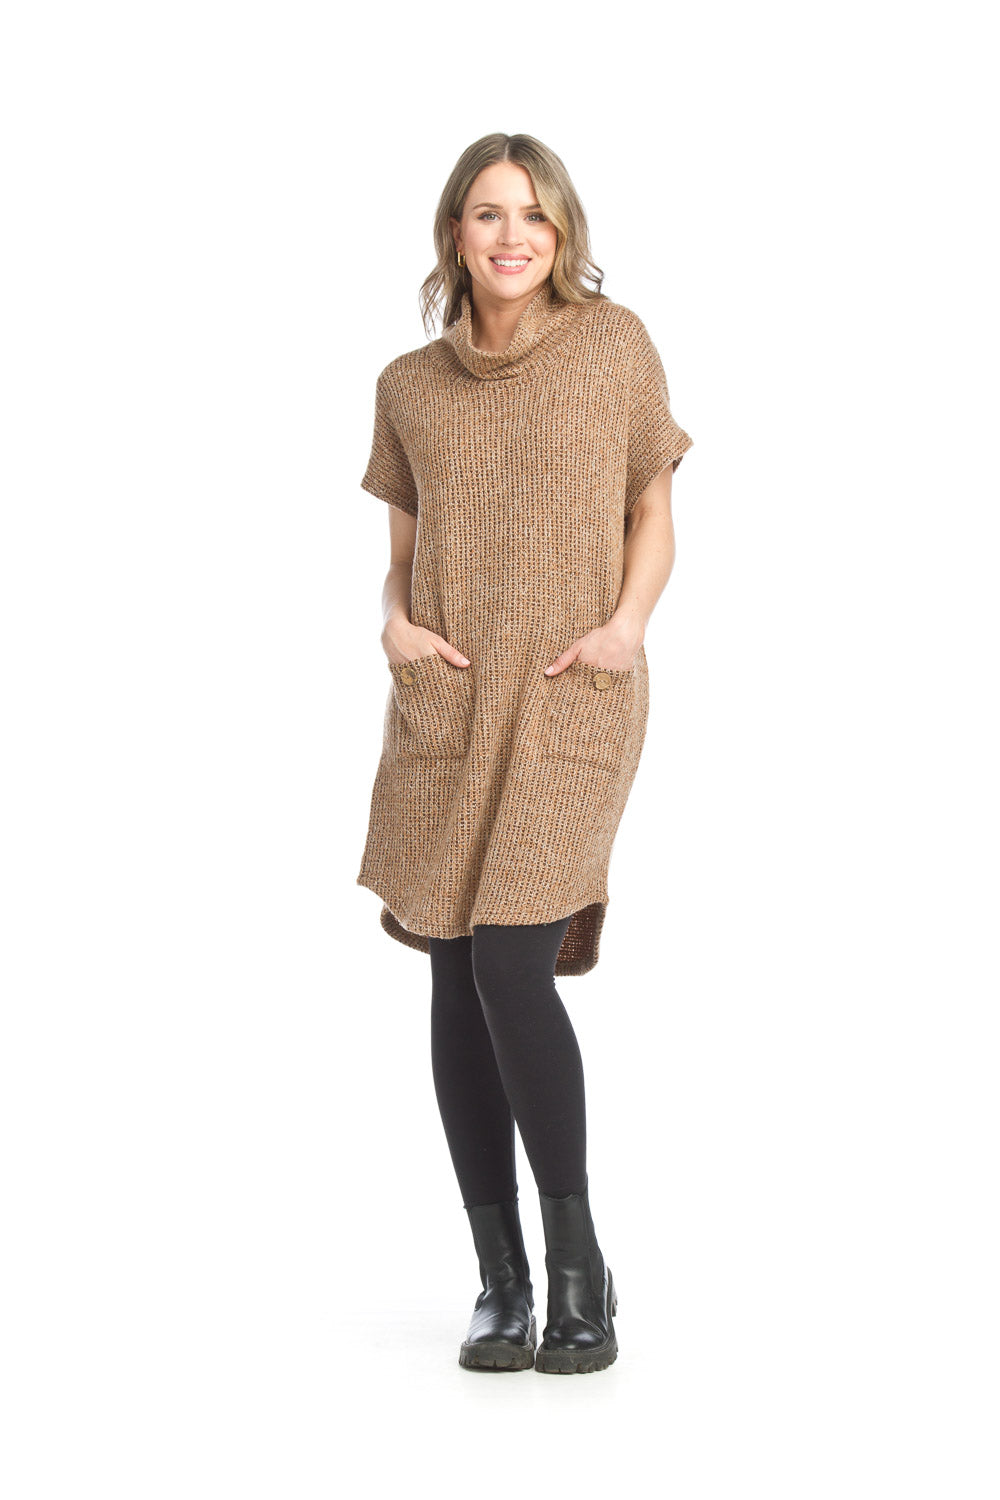 SD-15407 - Heathered Short Sleeve Sweater Dress with Pockets